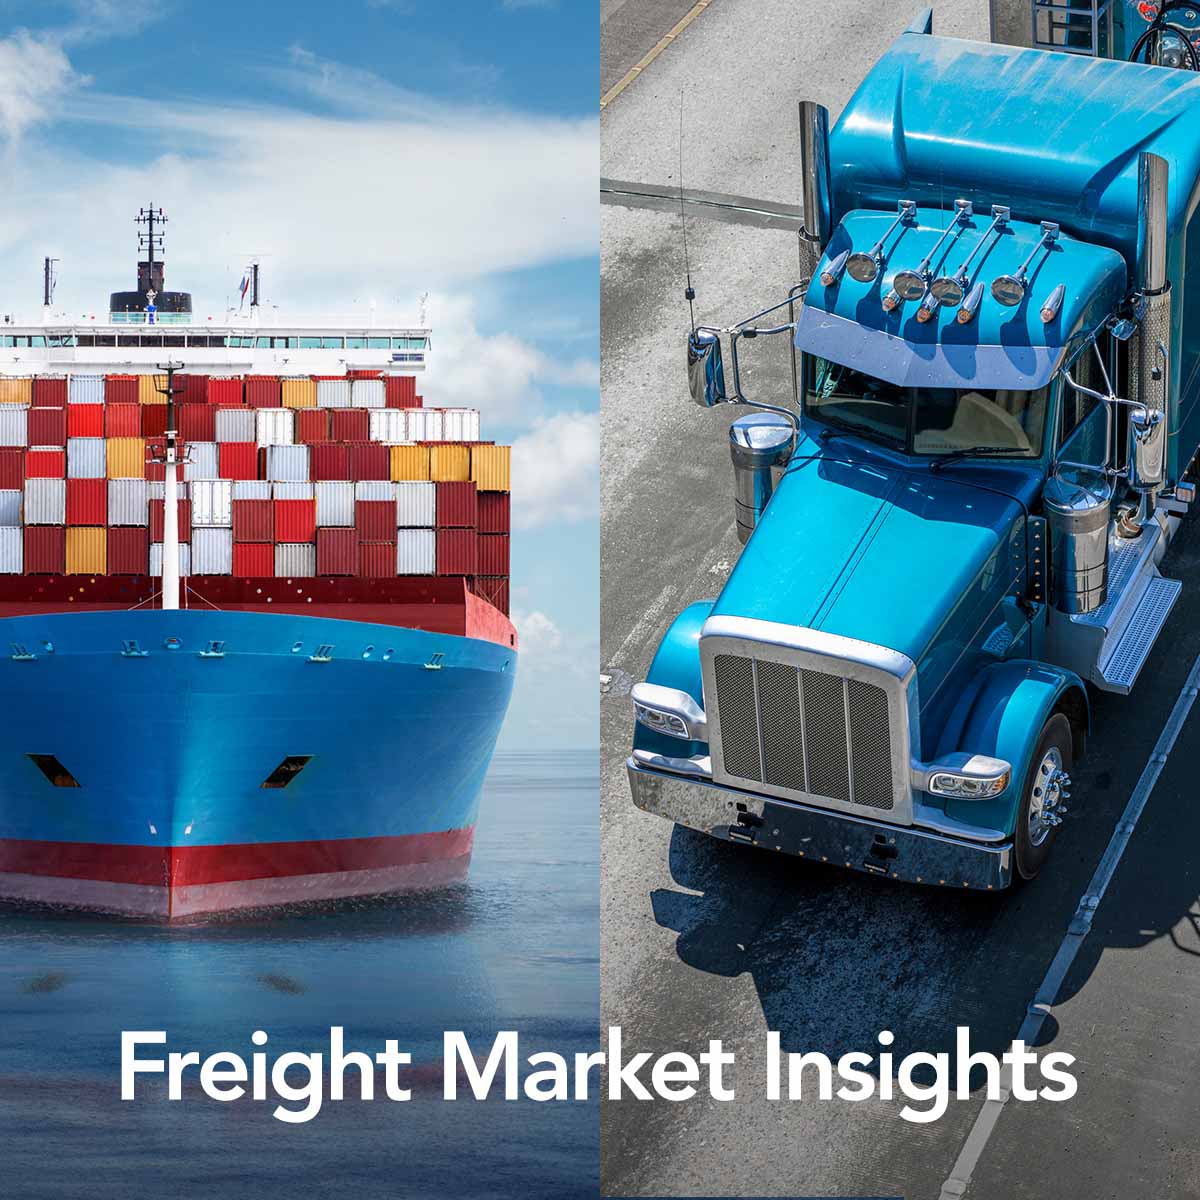 NEW REPORT: Check out our updated forecast for trucking rates, when we expect carrier capacity to tighten again, and the ocean-shipping disruptions we see on the horizon ➡️ ms.spr.ly/6016coqgY